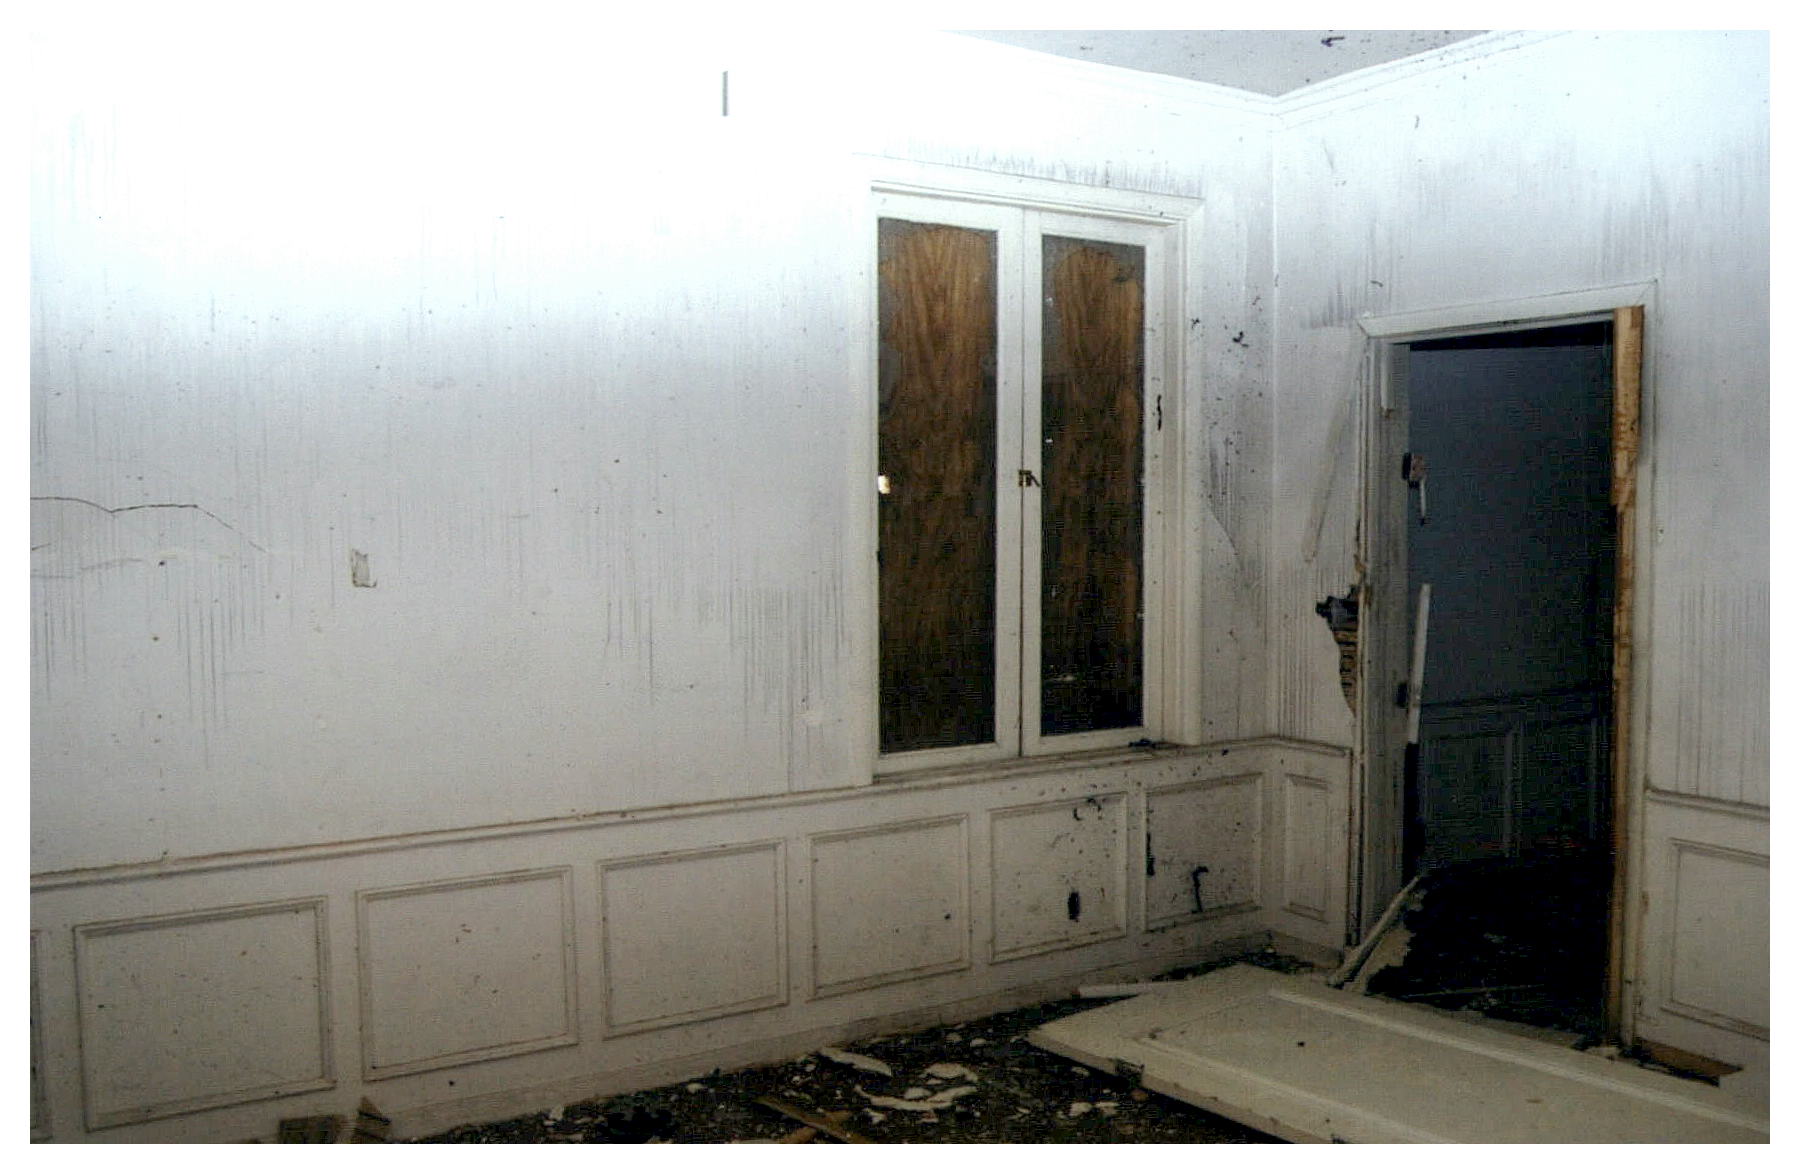 Before: same corner view with boarded up window and door lying on the floor.